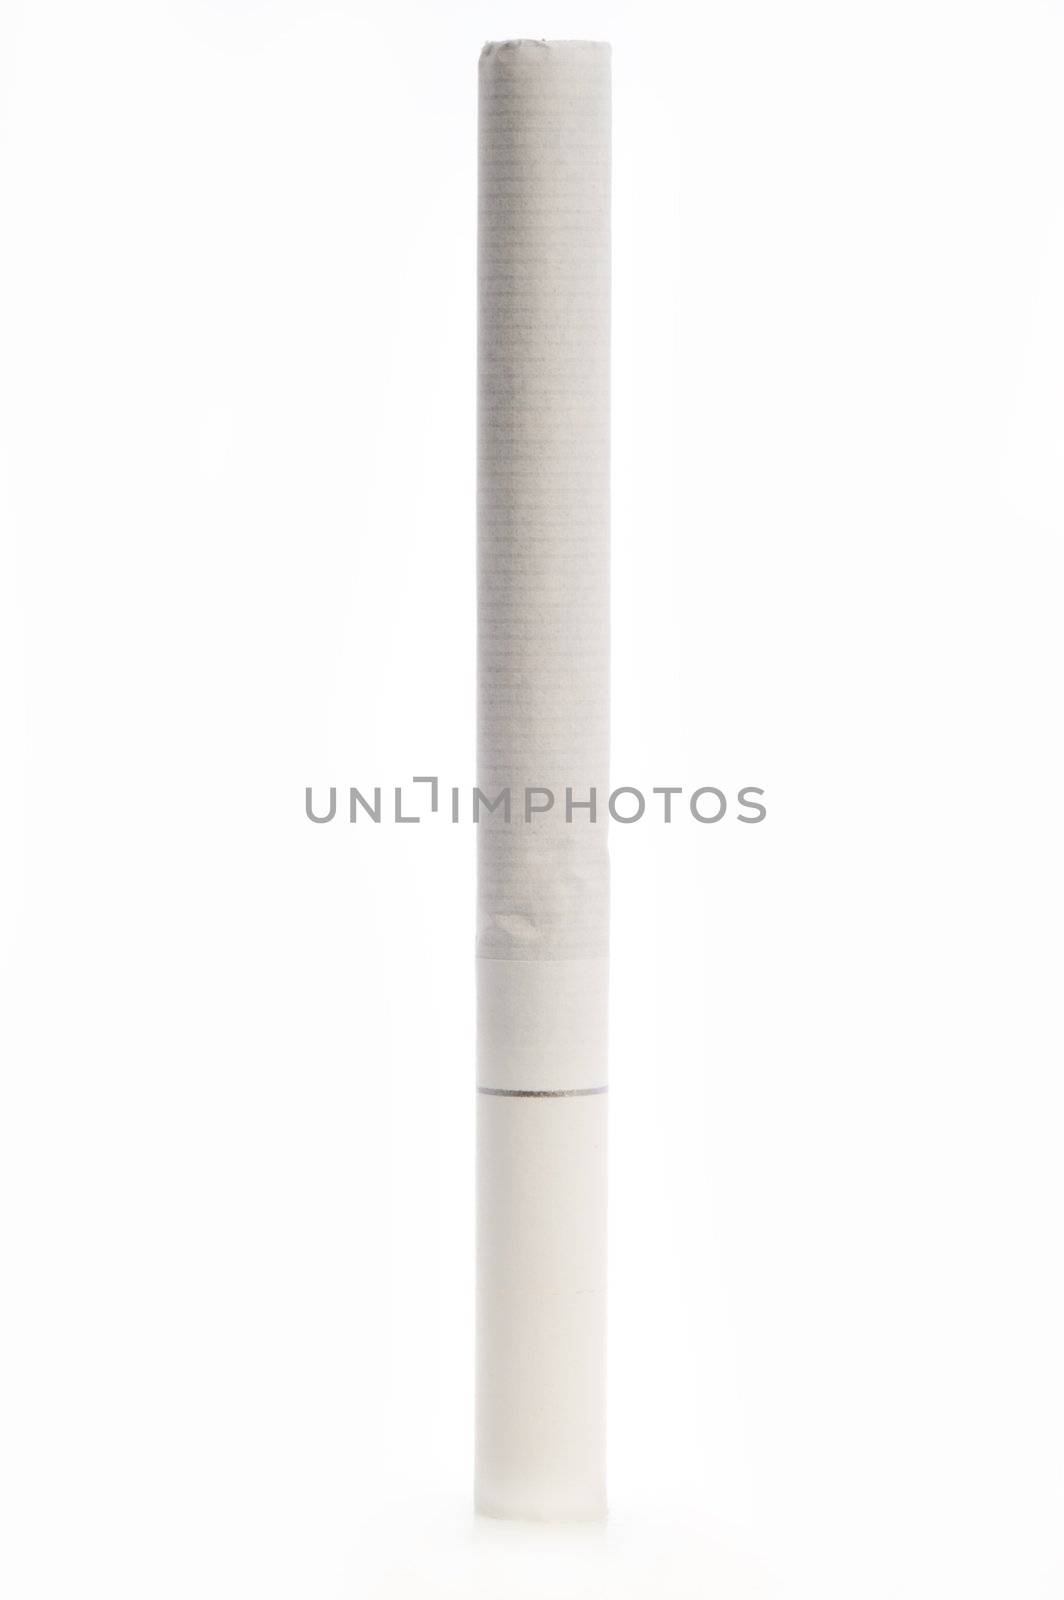 Cigarette filter with a white on white